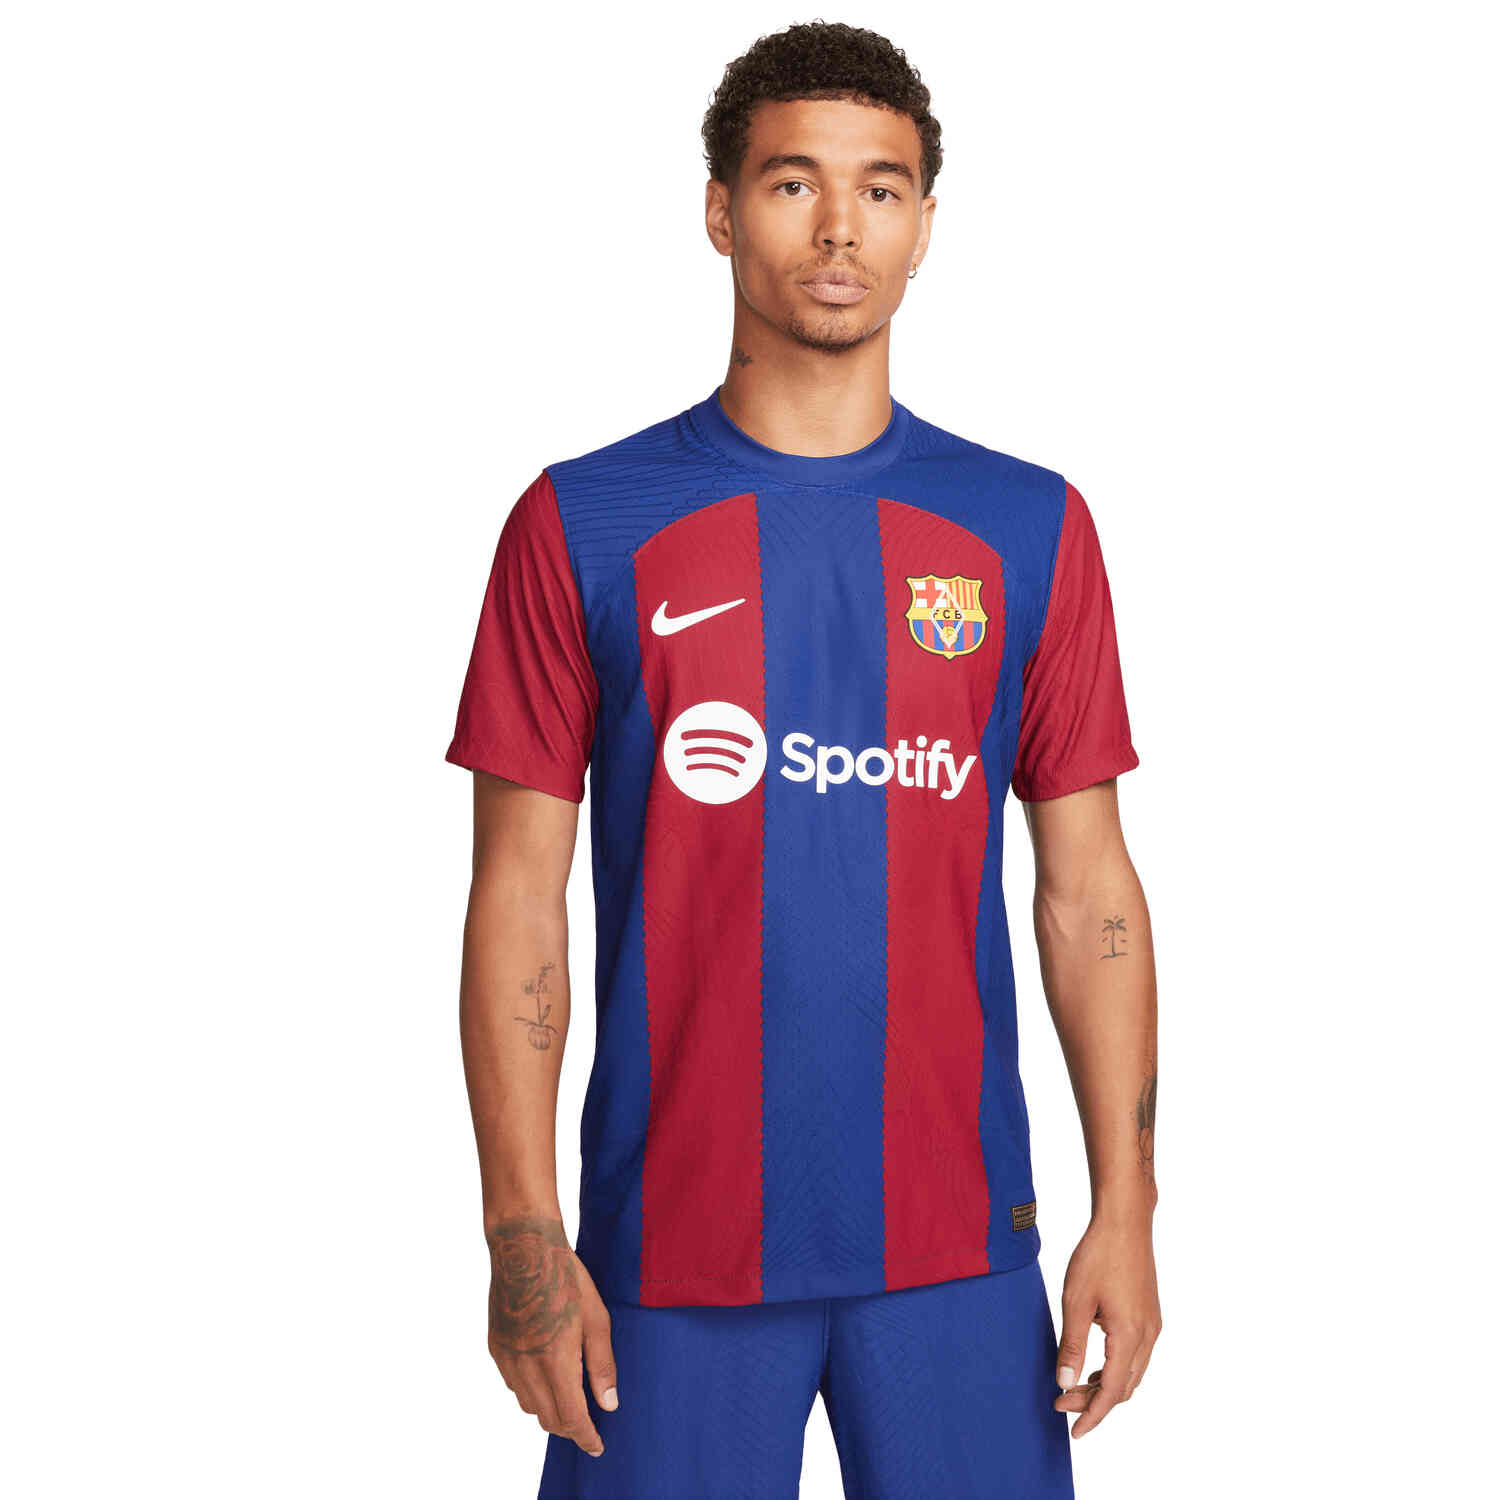 All Champions League Clubs Home Kit For 2023/2024 Season 